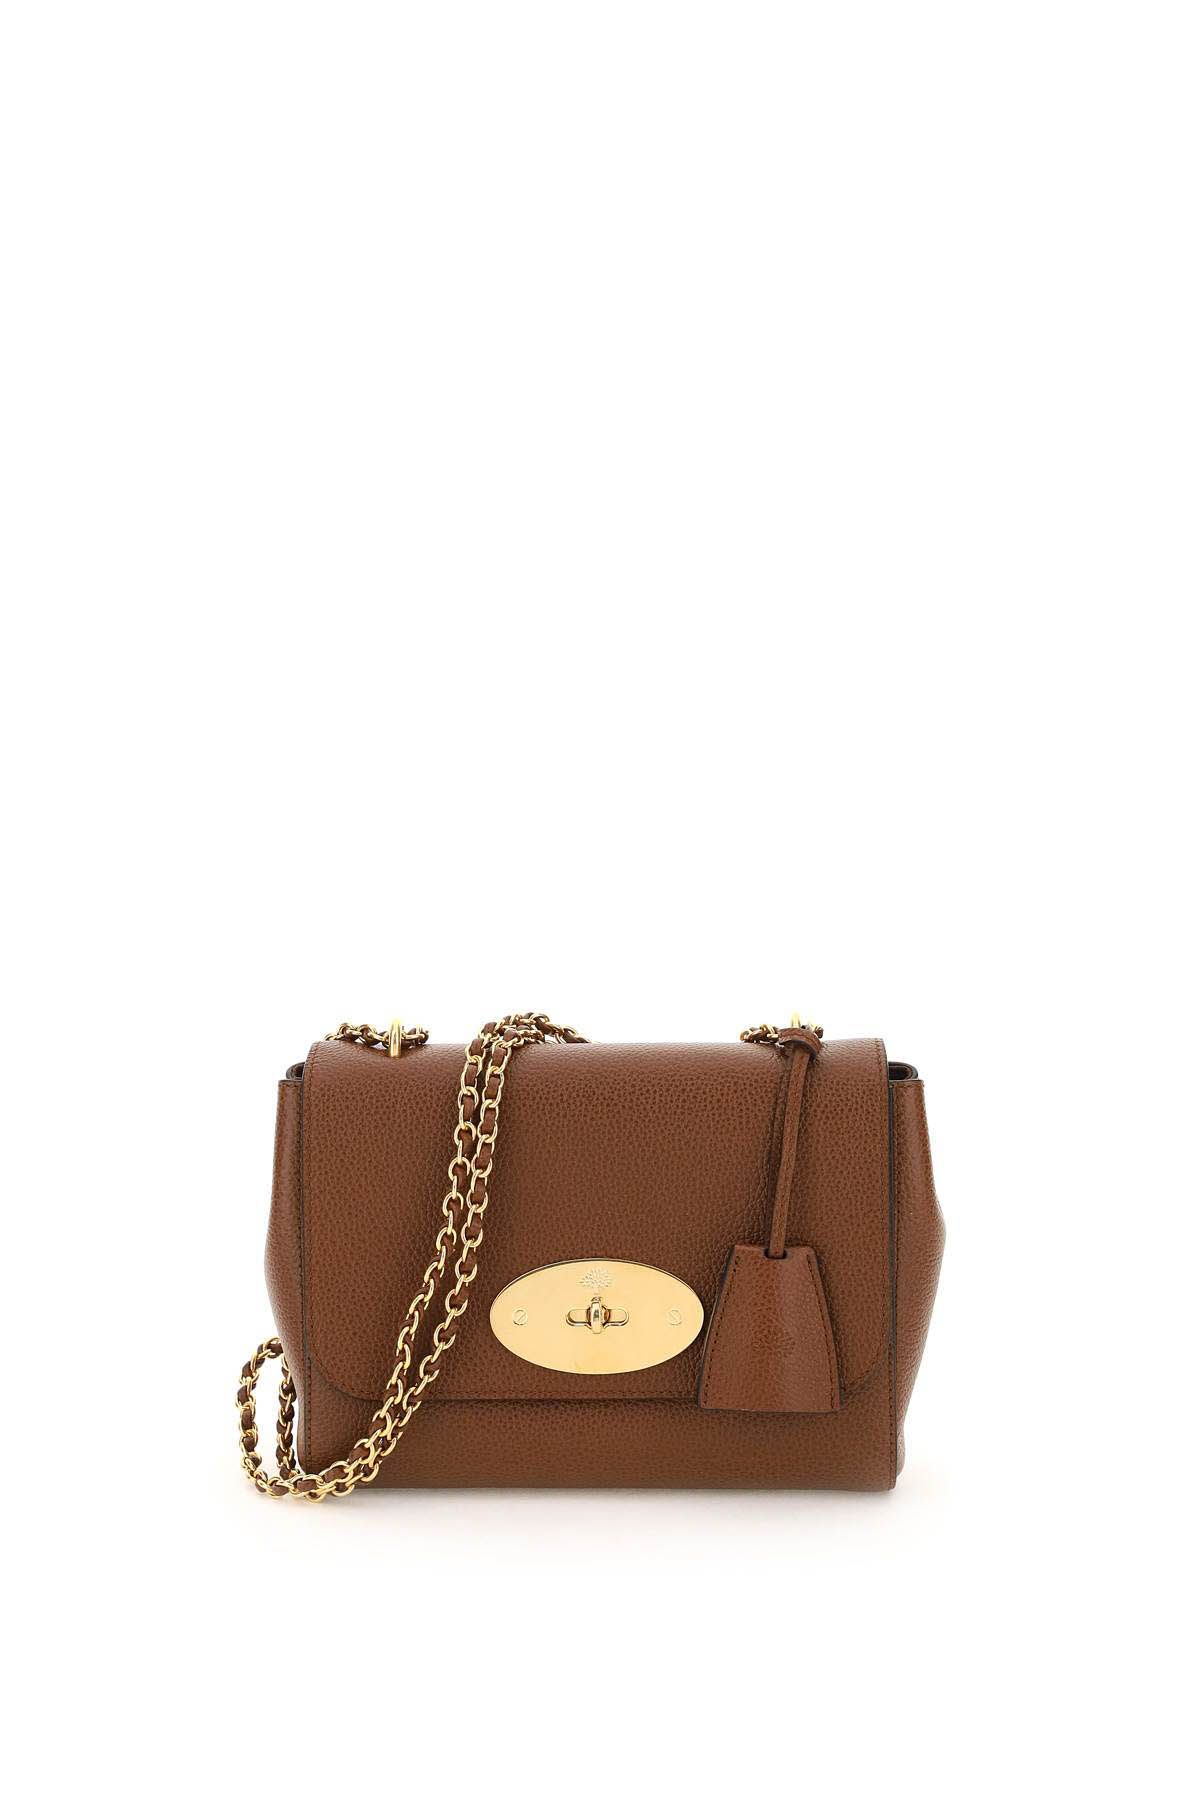 Mulberry MULBERRY lily shoulder bag